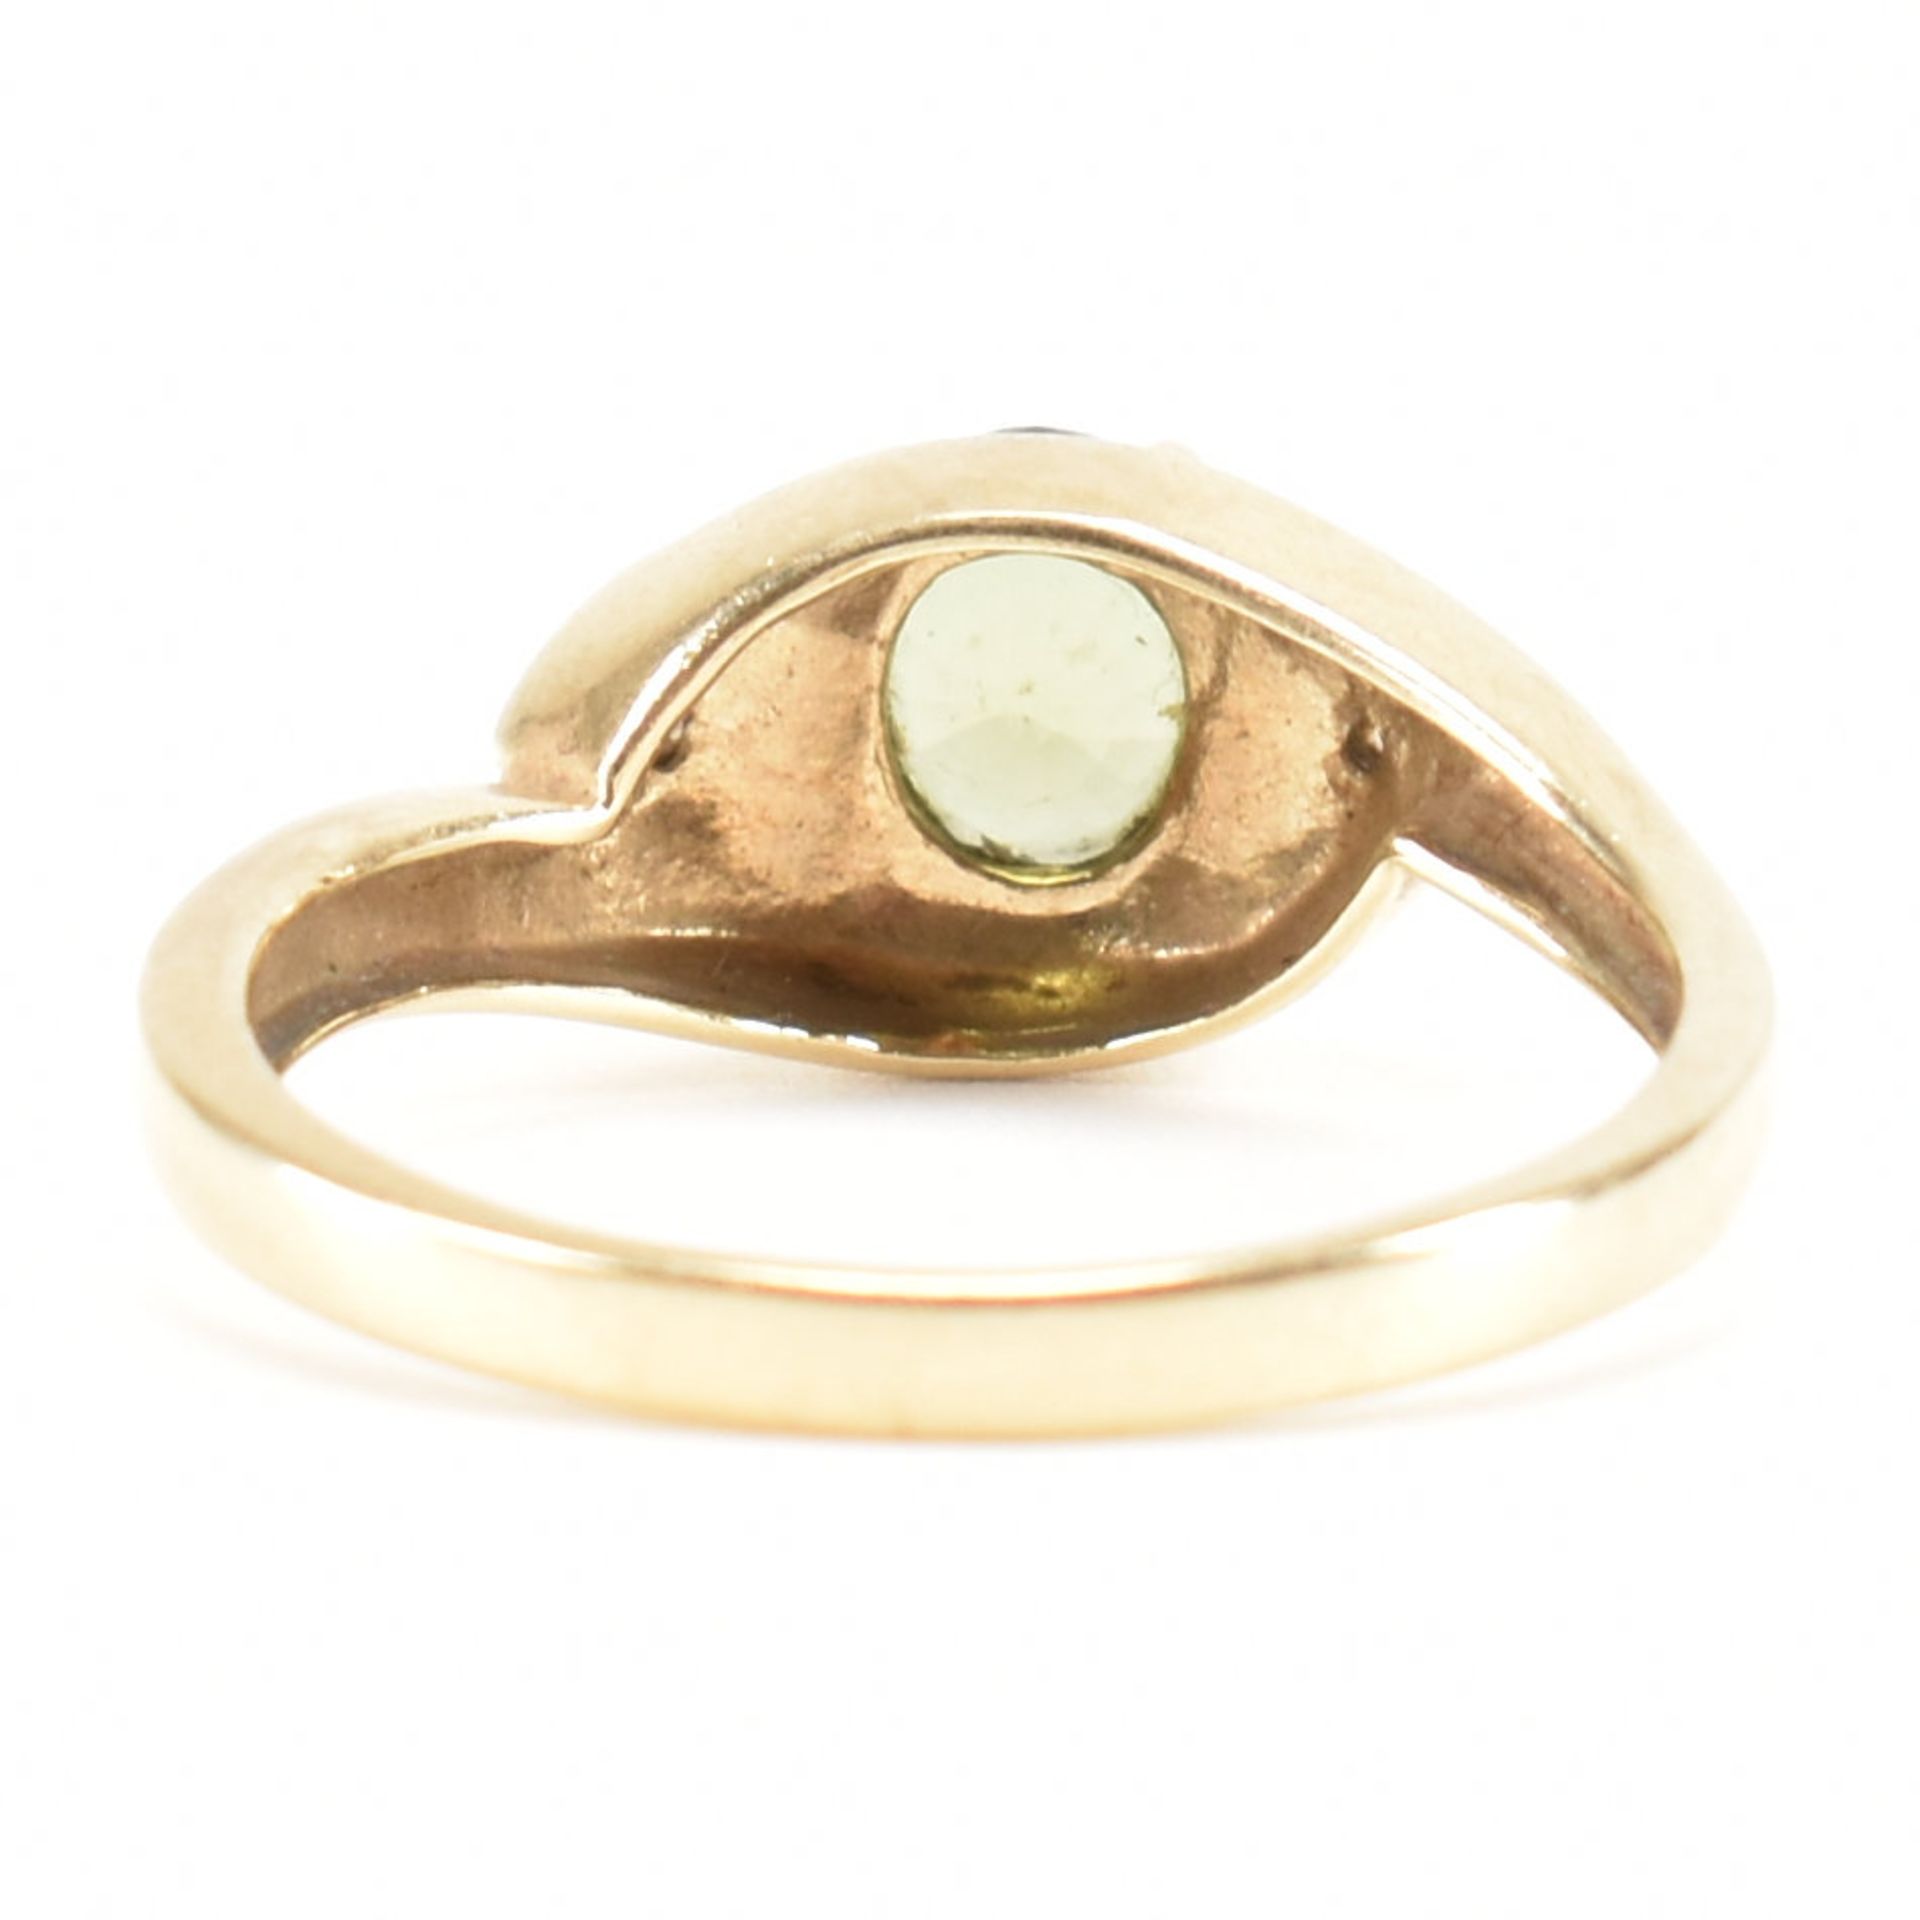 HALLMARKED 9CT GOLD & GREEN STONE CROSSOVER RING - Image 3 of 8